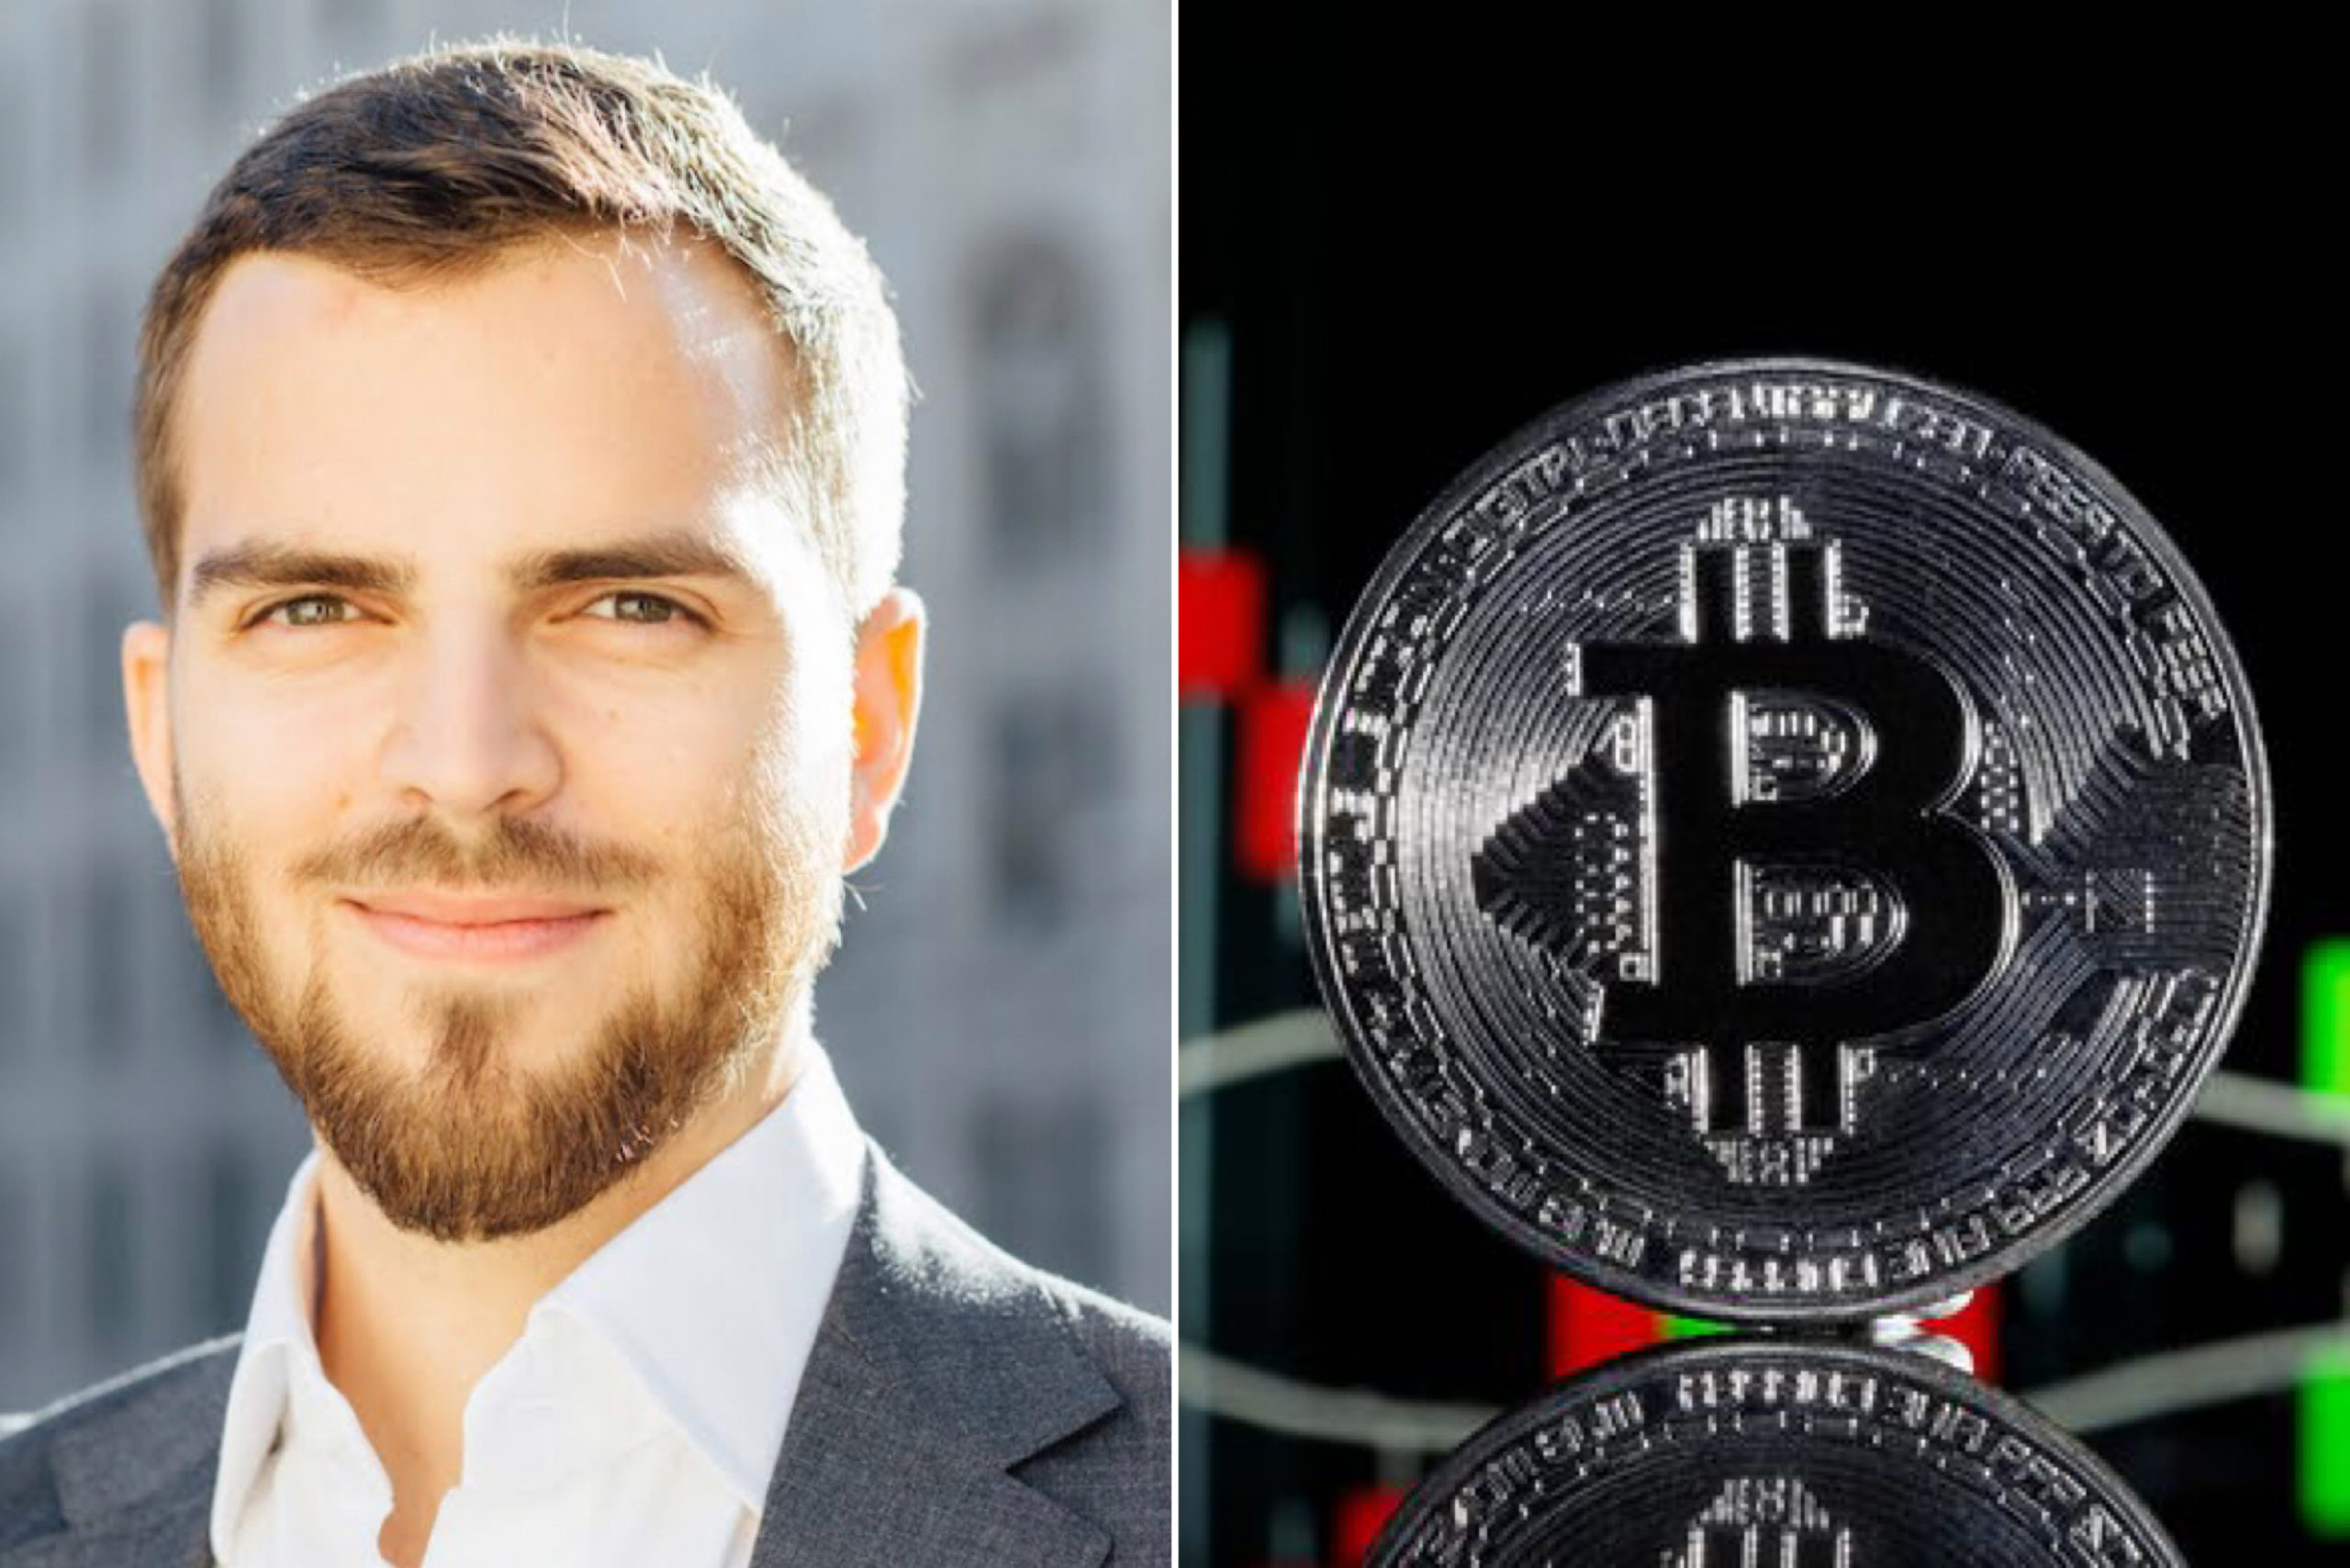 Computer Programmer Has Just Two Password Guesses Left To Access His £180m Bitcoin Account